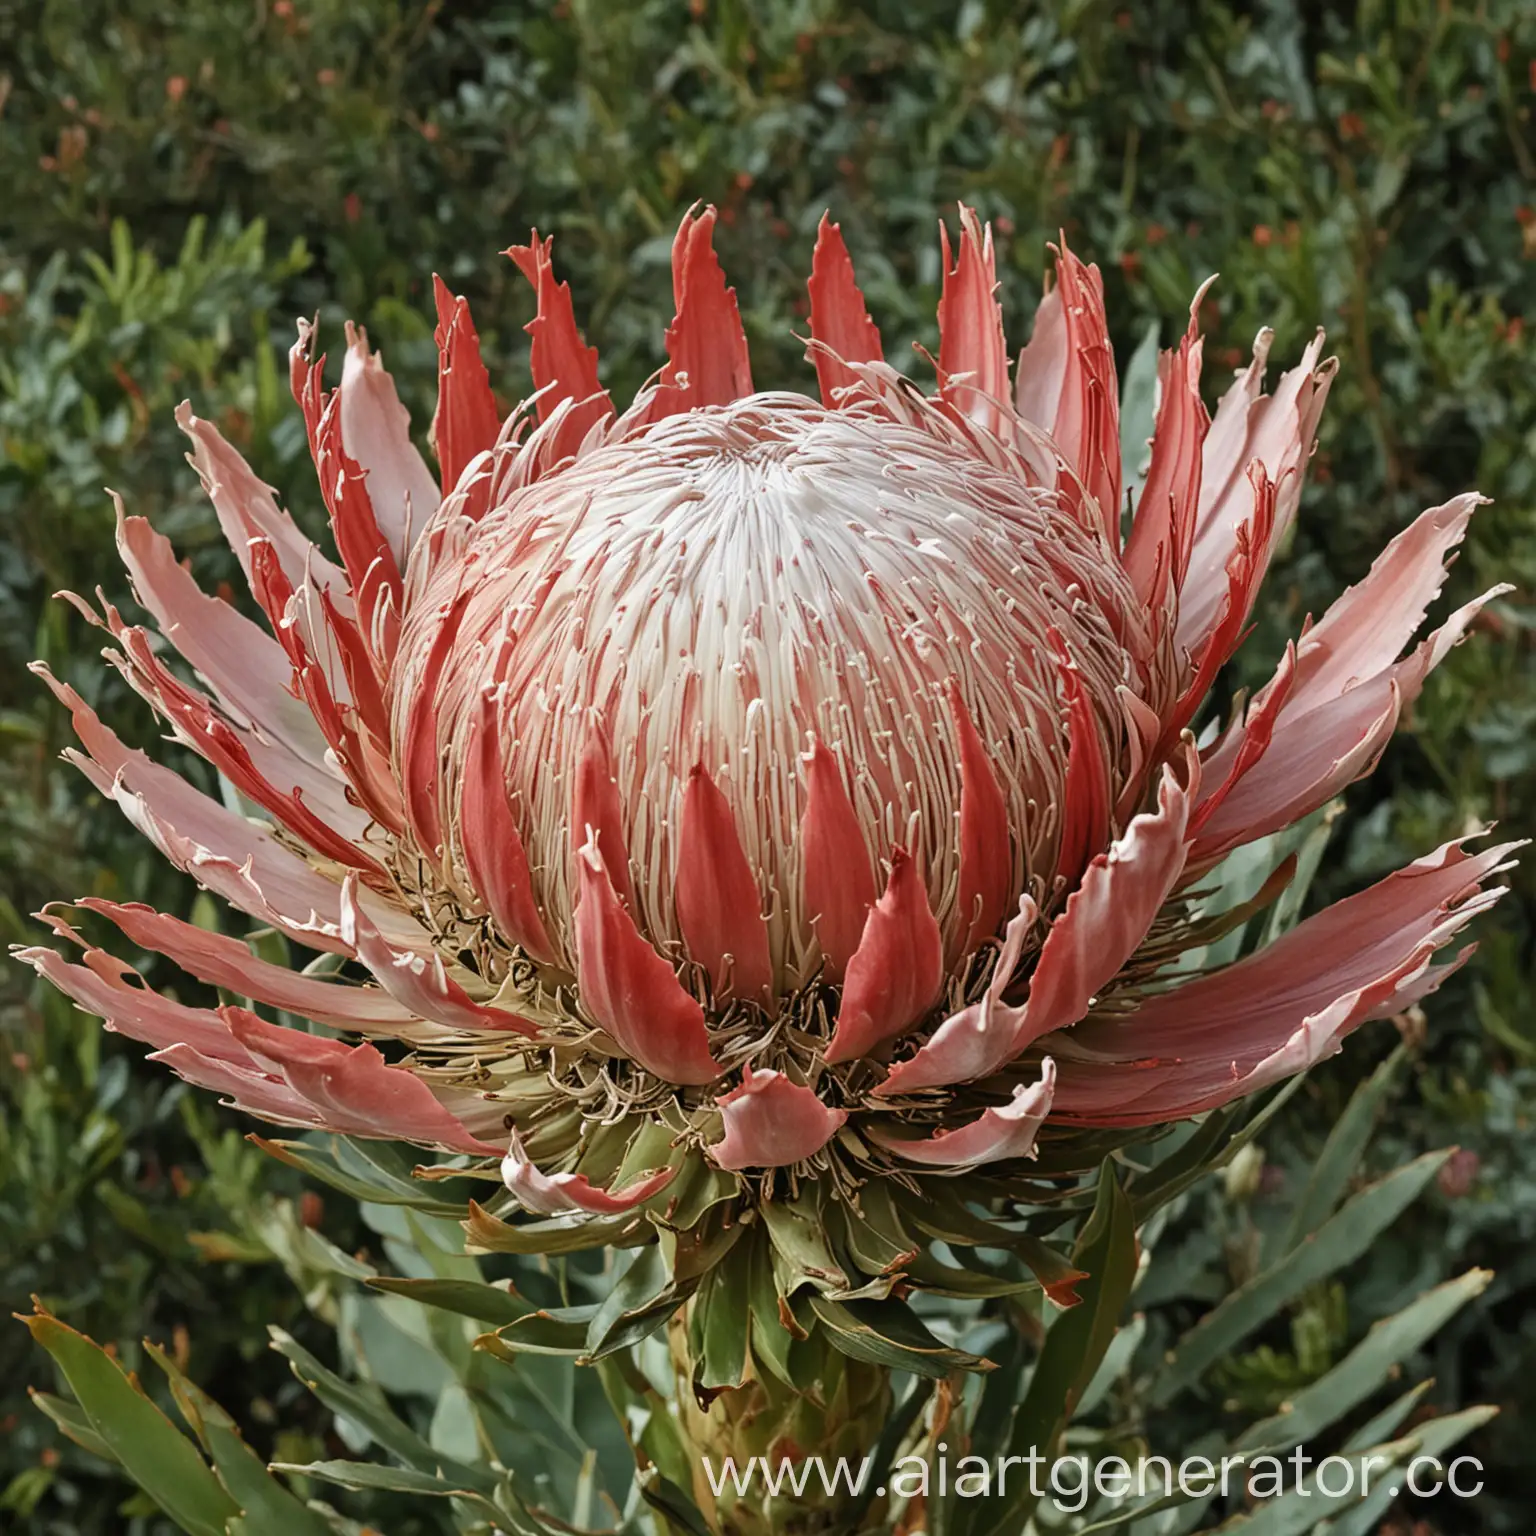 Vibrant-Protea-Flower-Blooming-in-Sunlight